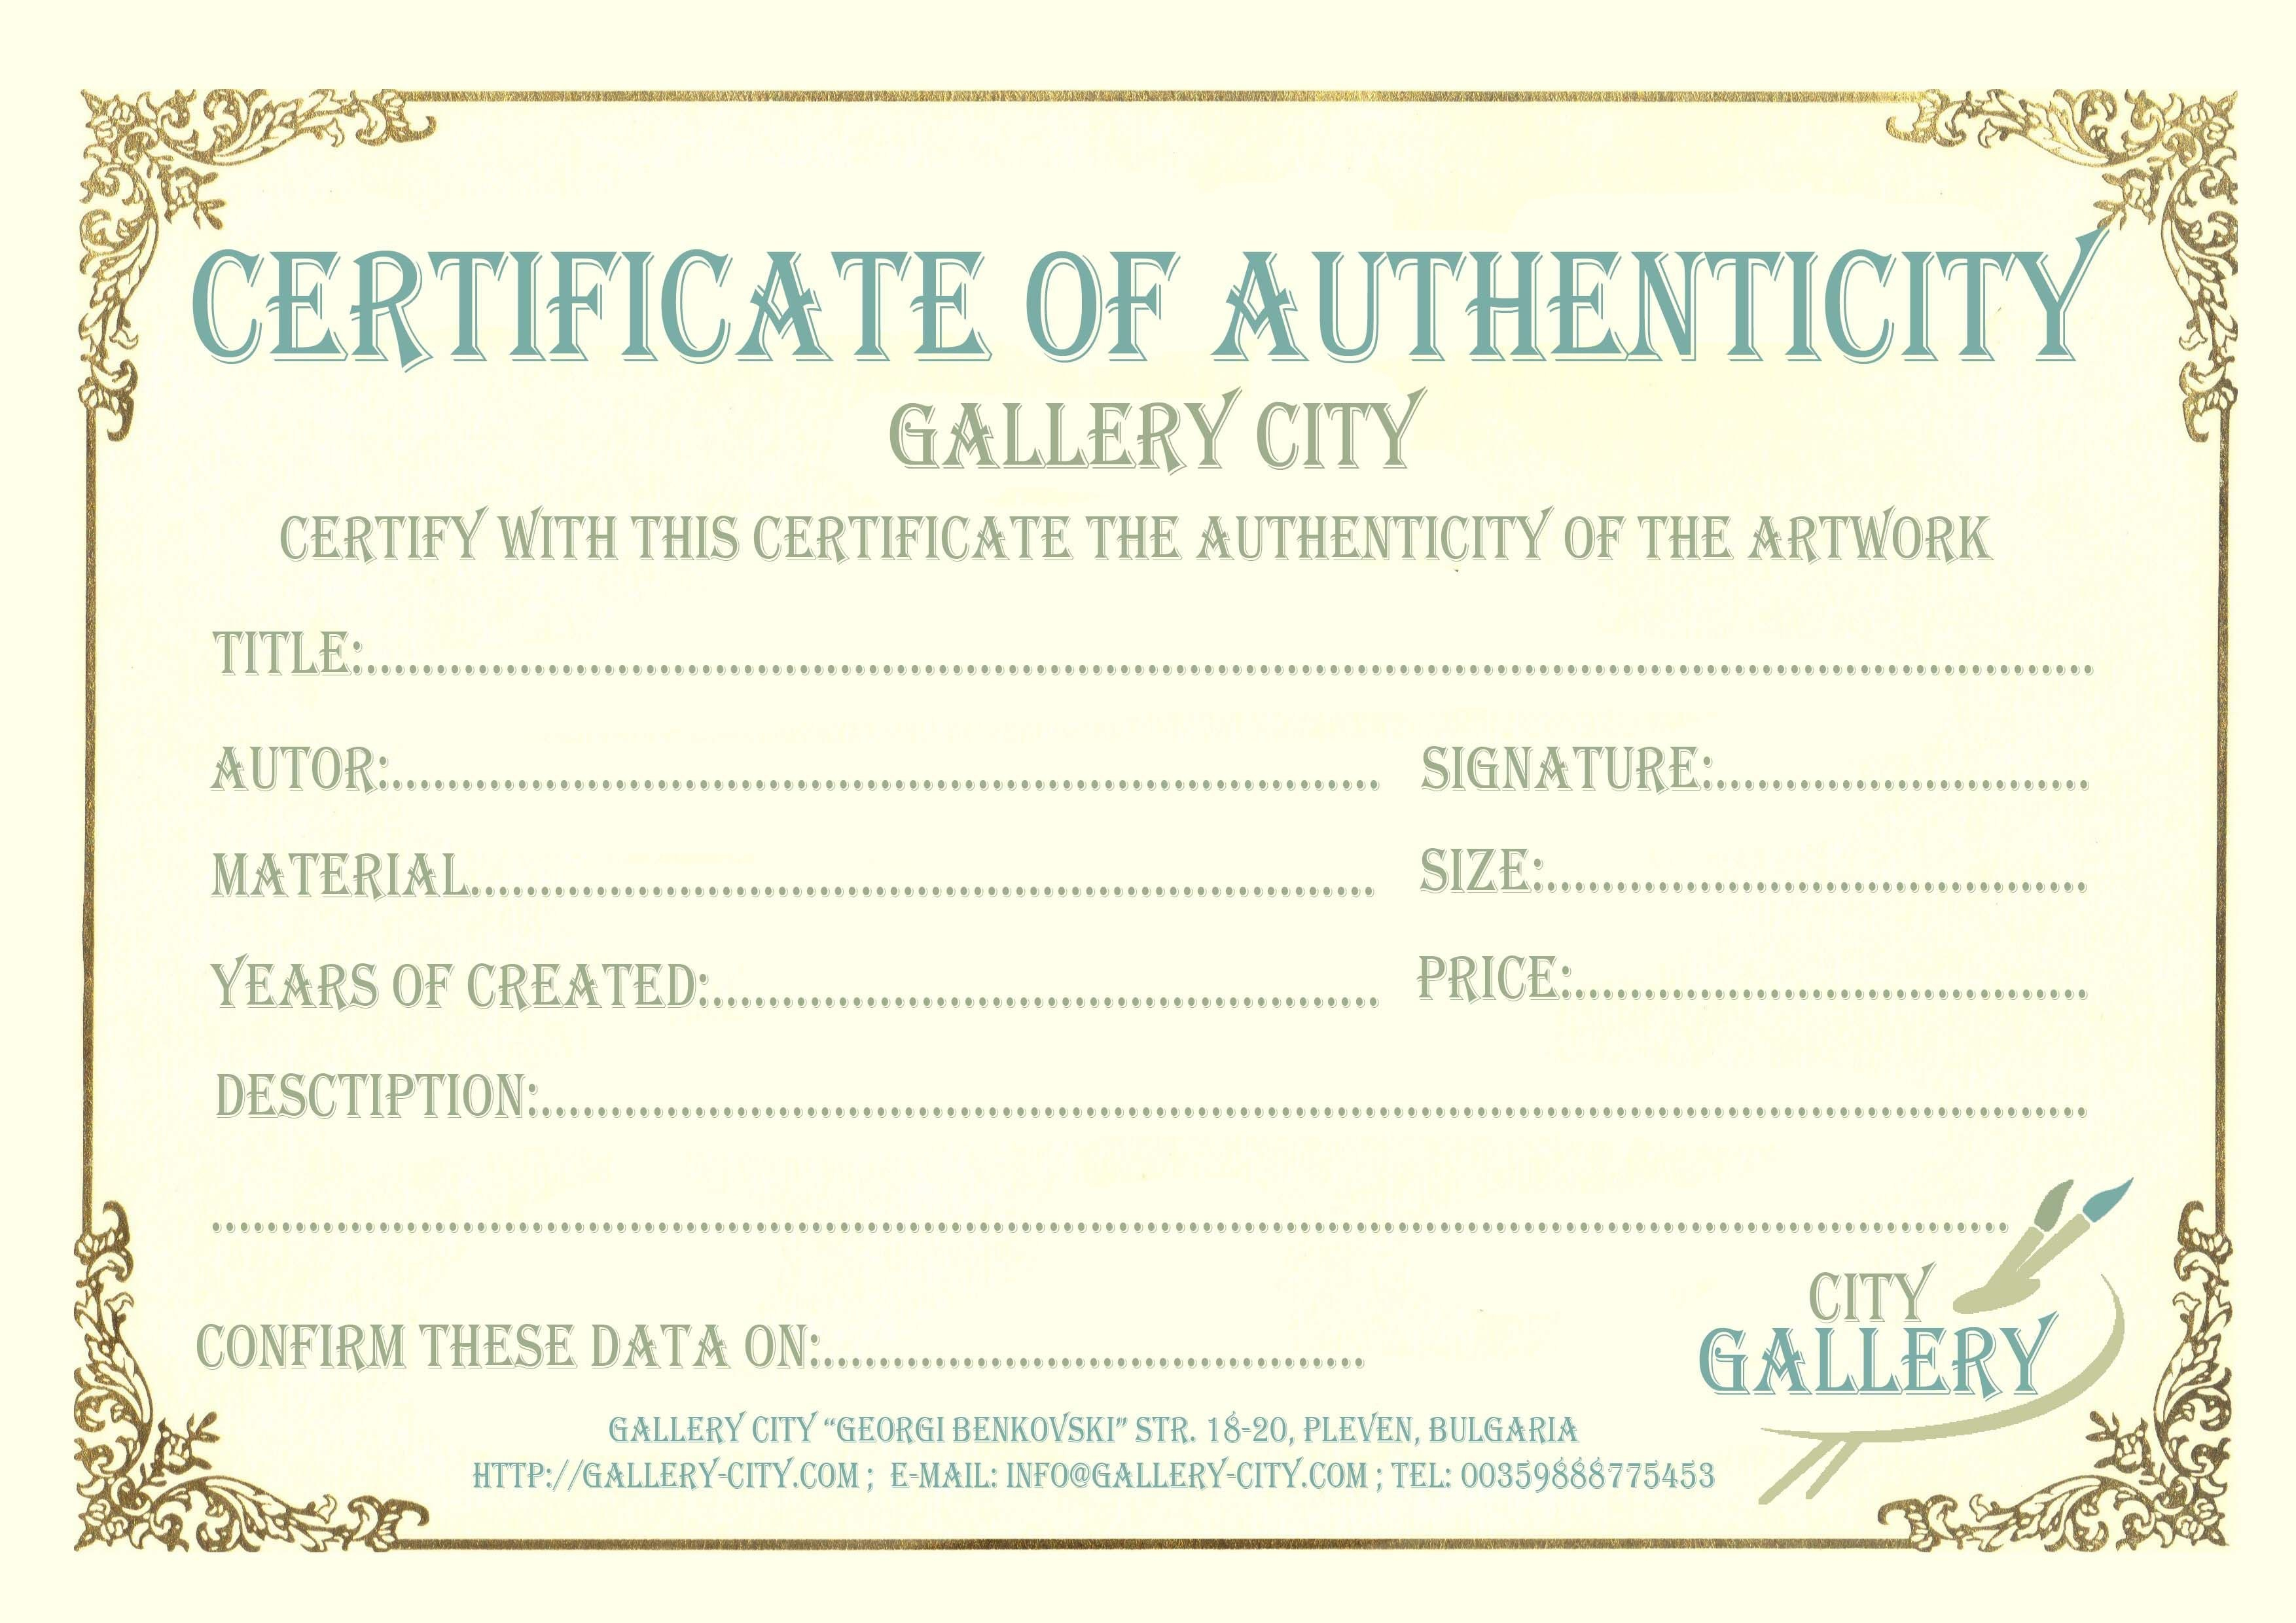 Certificate Authenticity Template Art Authenticity Certificate intended for Certificate Of Authenticity Photography Template